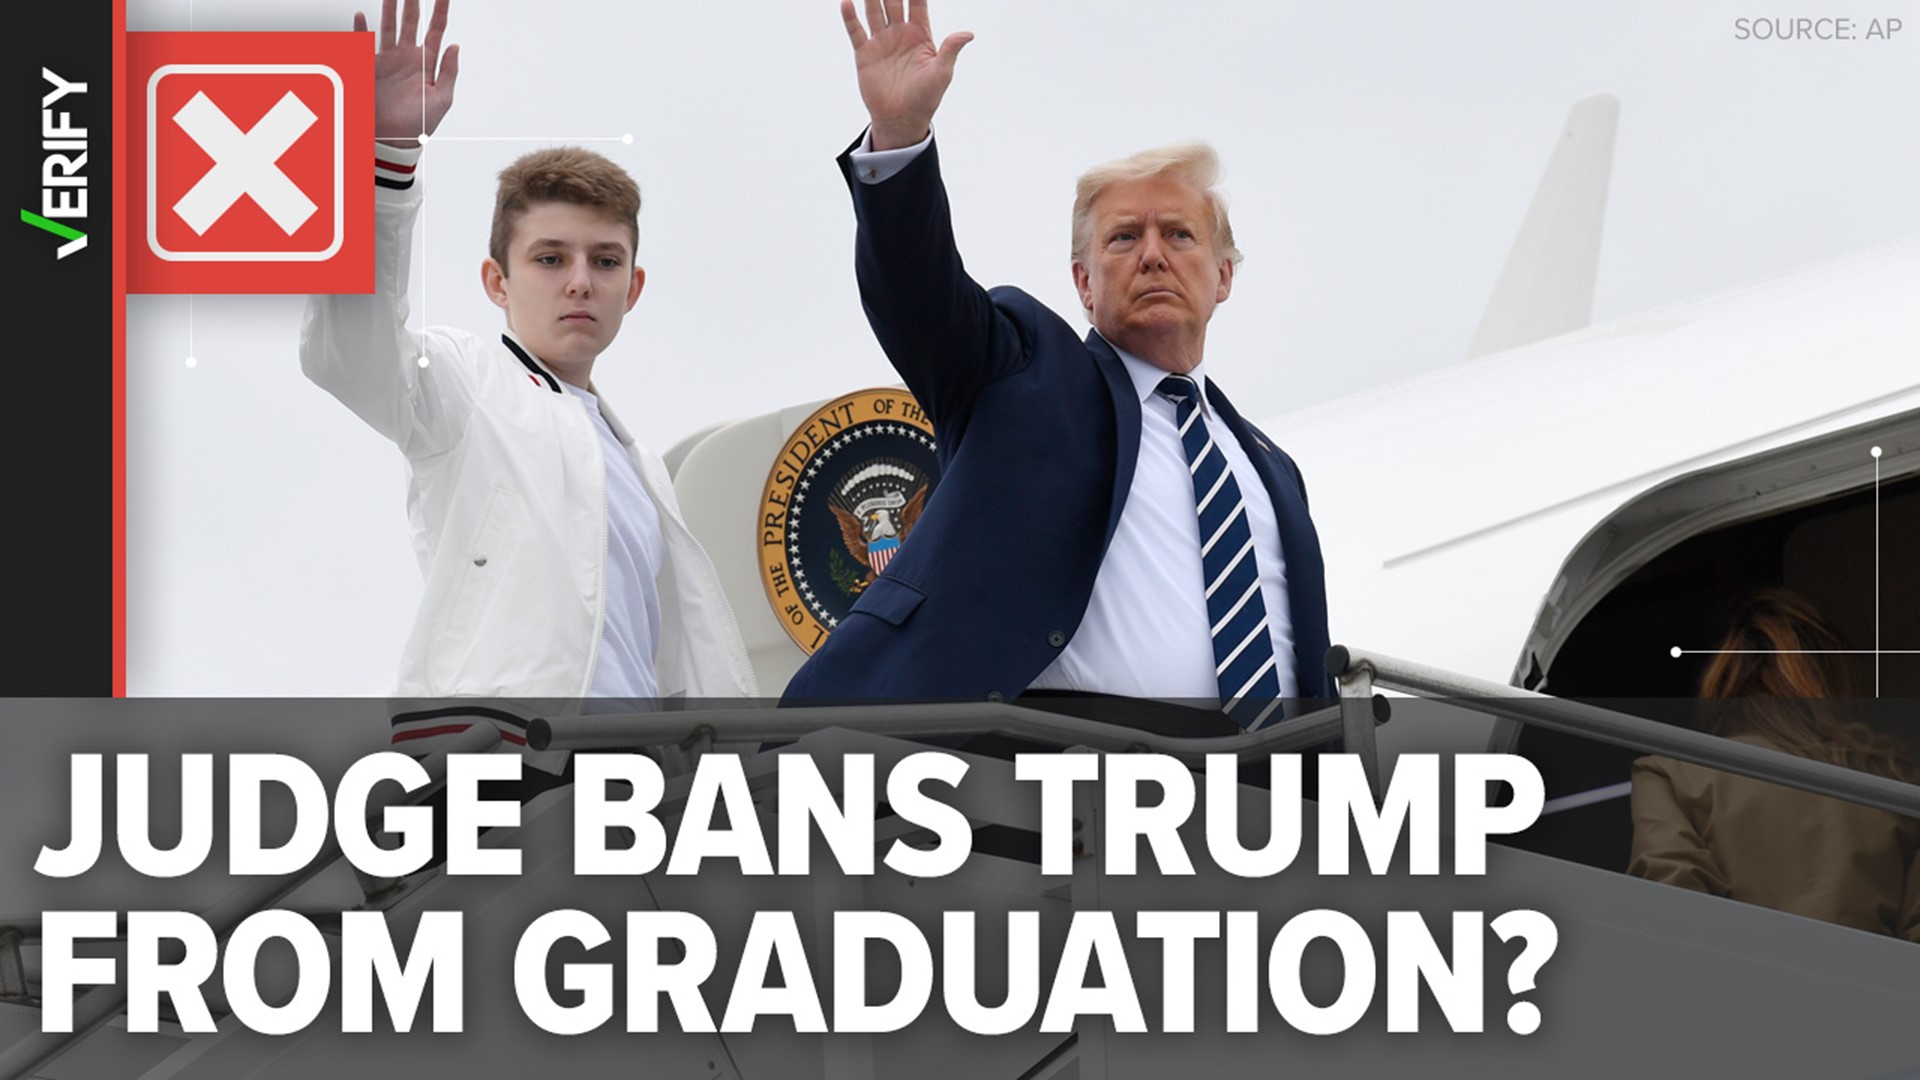 Former President Donald Trump claimed the judge in his criminal trial won't allow him to attend his son's graduation.